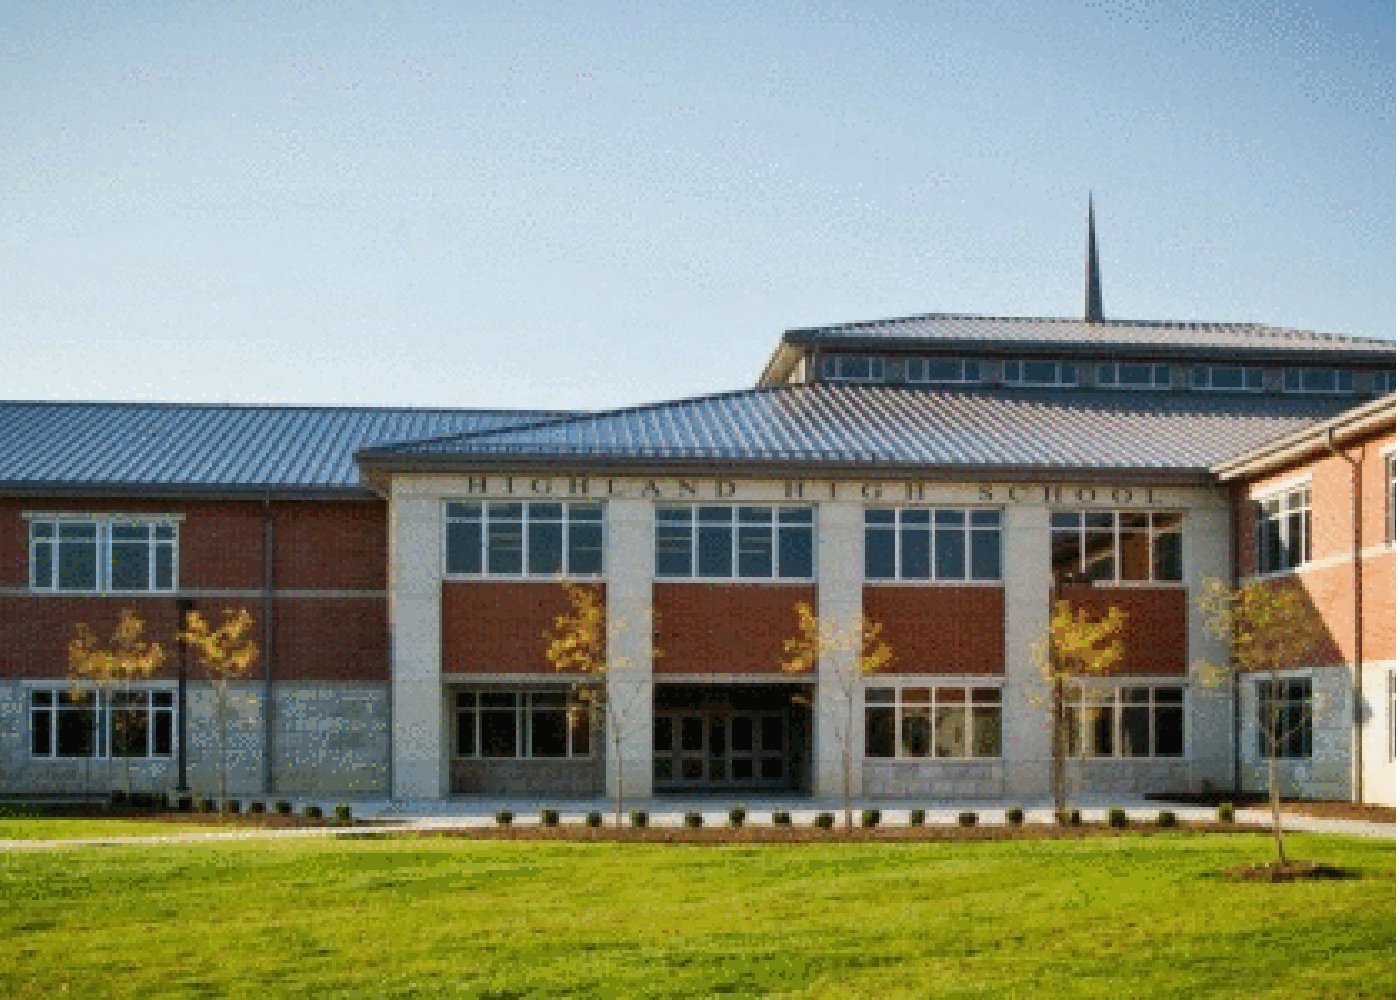 Picture of high school